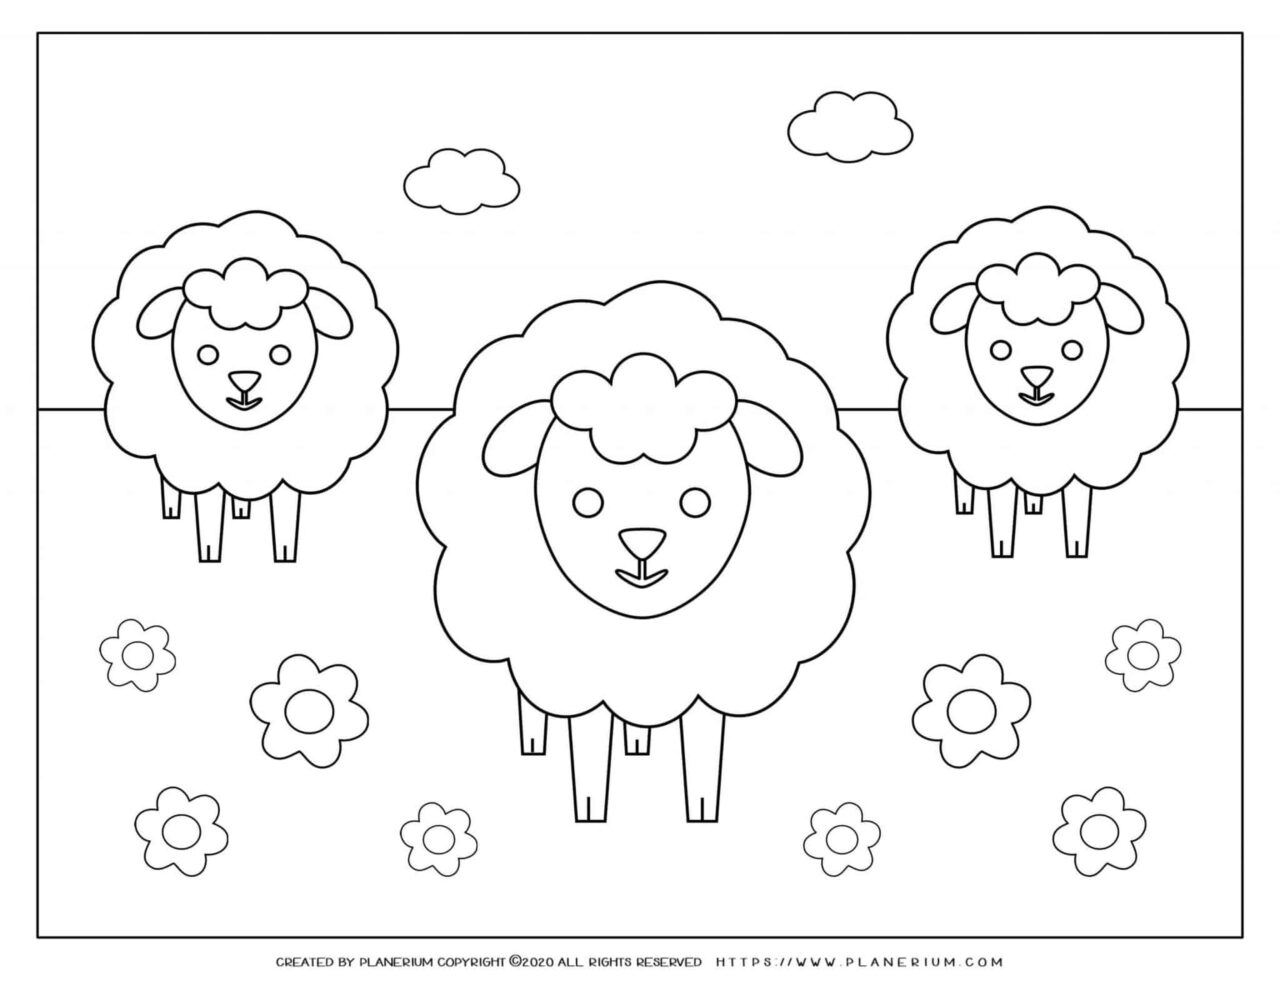 Easter coloring page - Three lambs in a flower field